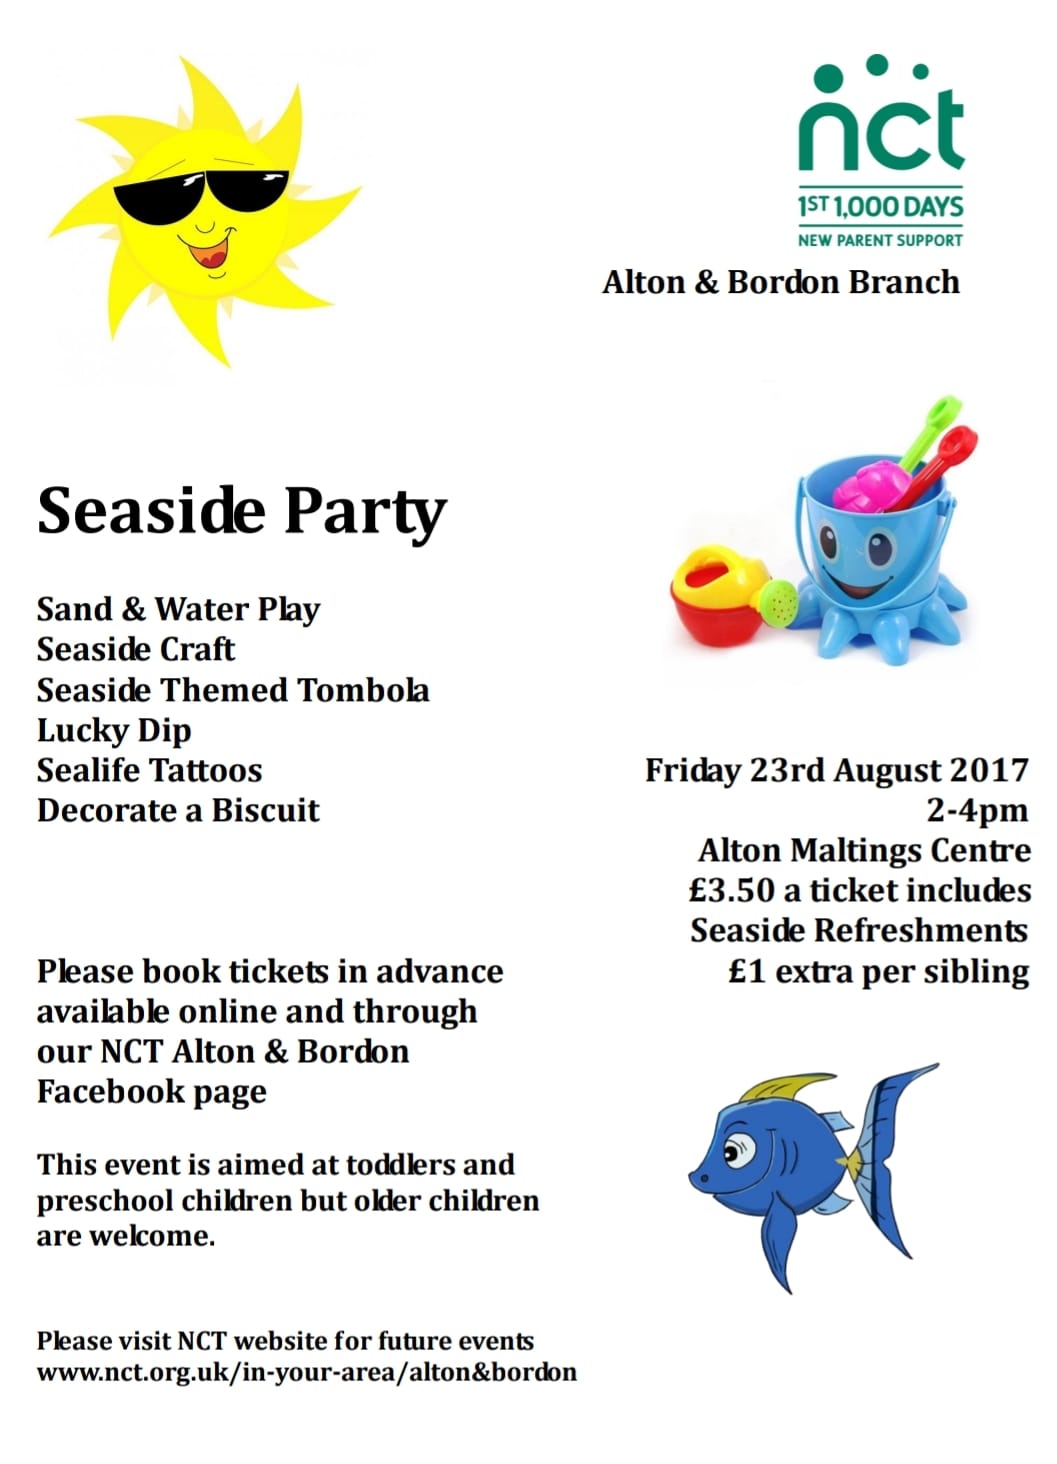 Summer Seaside Party - join us for activities such as sand & water play, seaside craft, seaside tombola, lucky dip etc. Please PREBOOK tickets - £3.50 per child, then just £1 extra per sibling. 